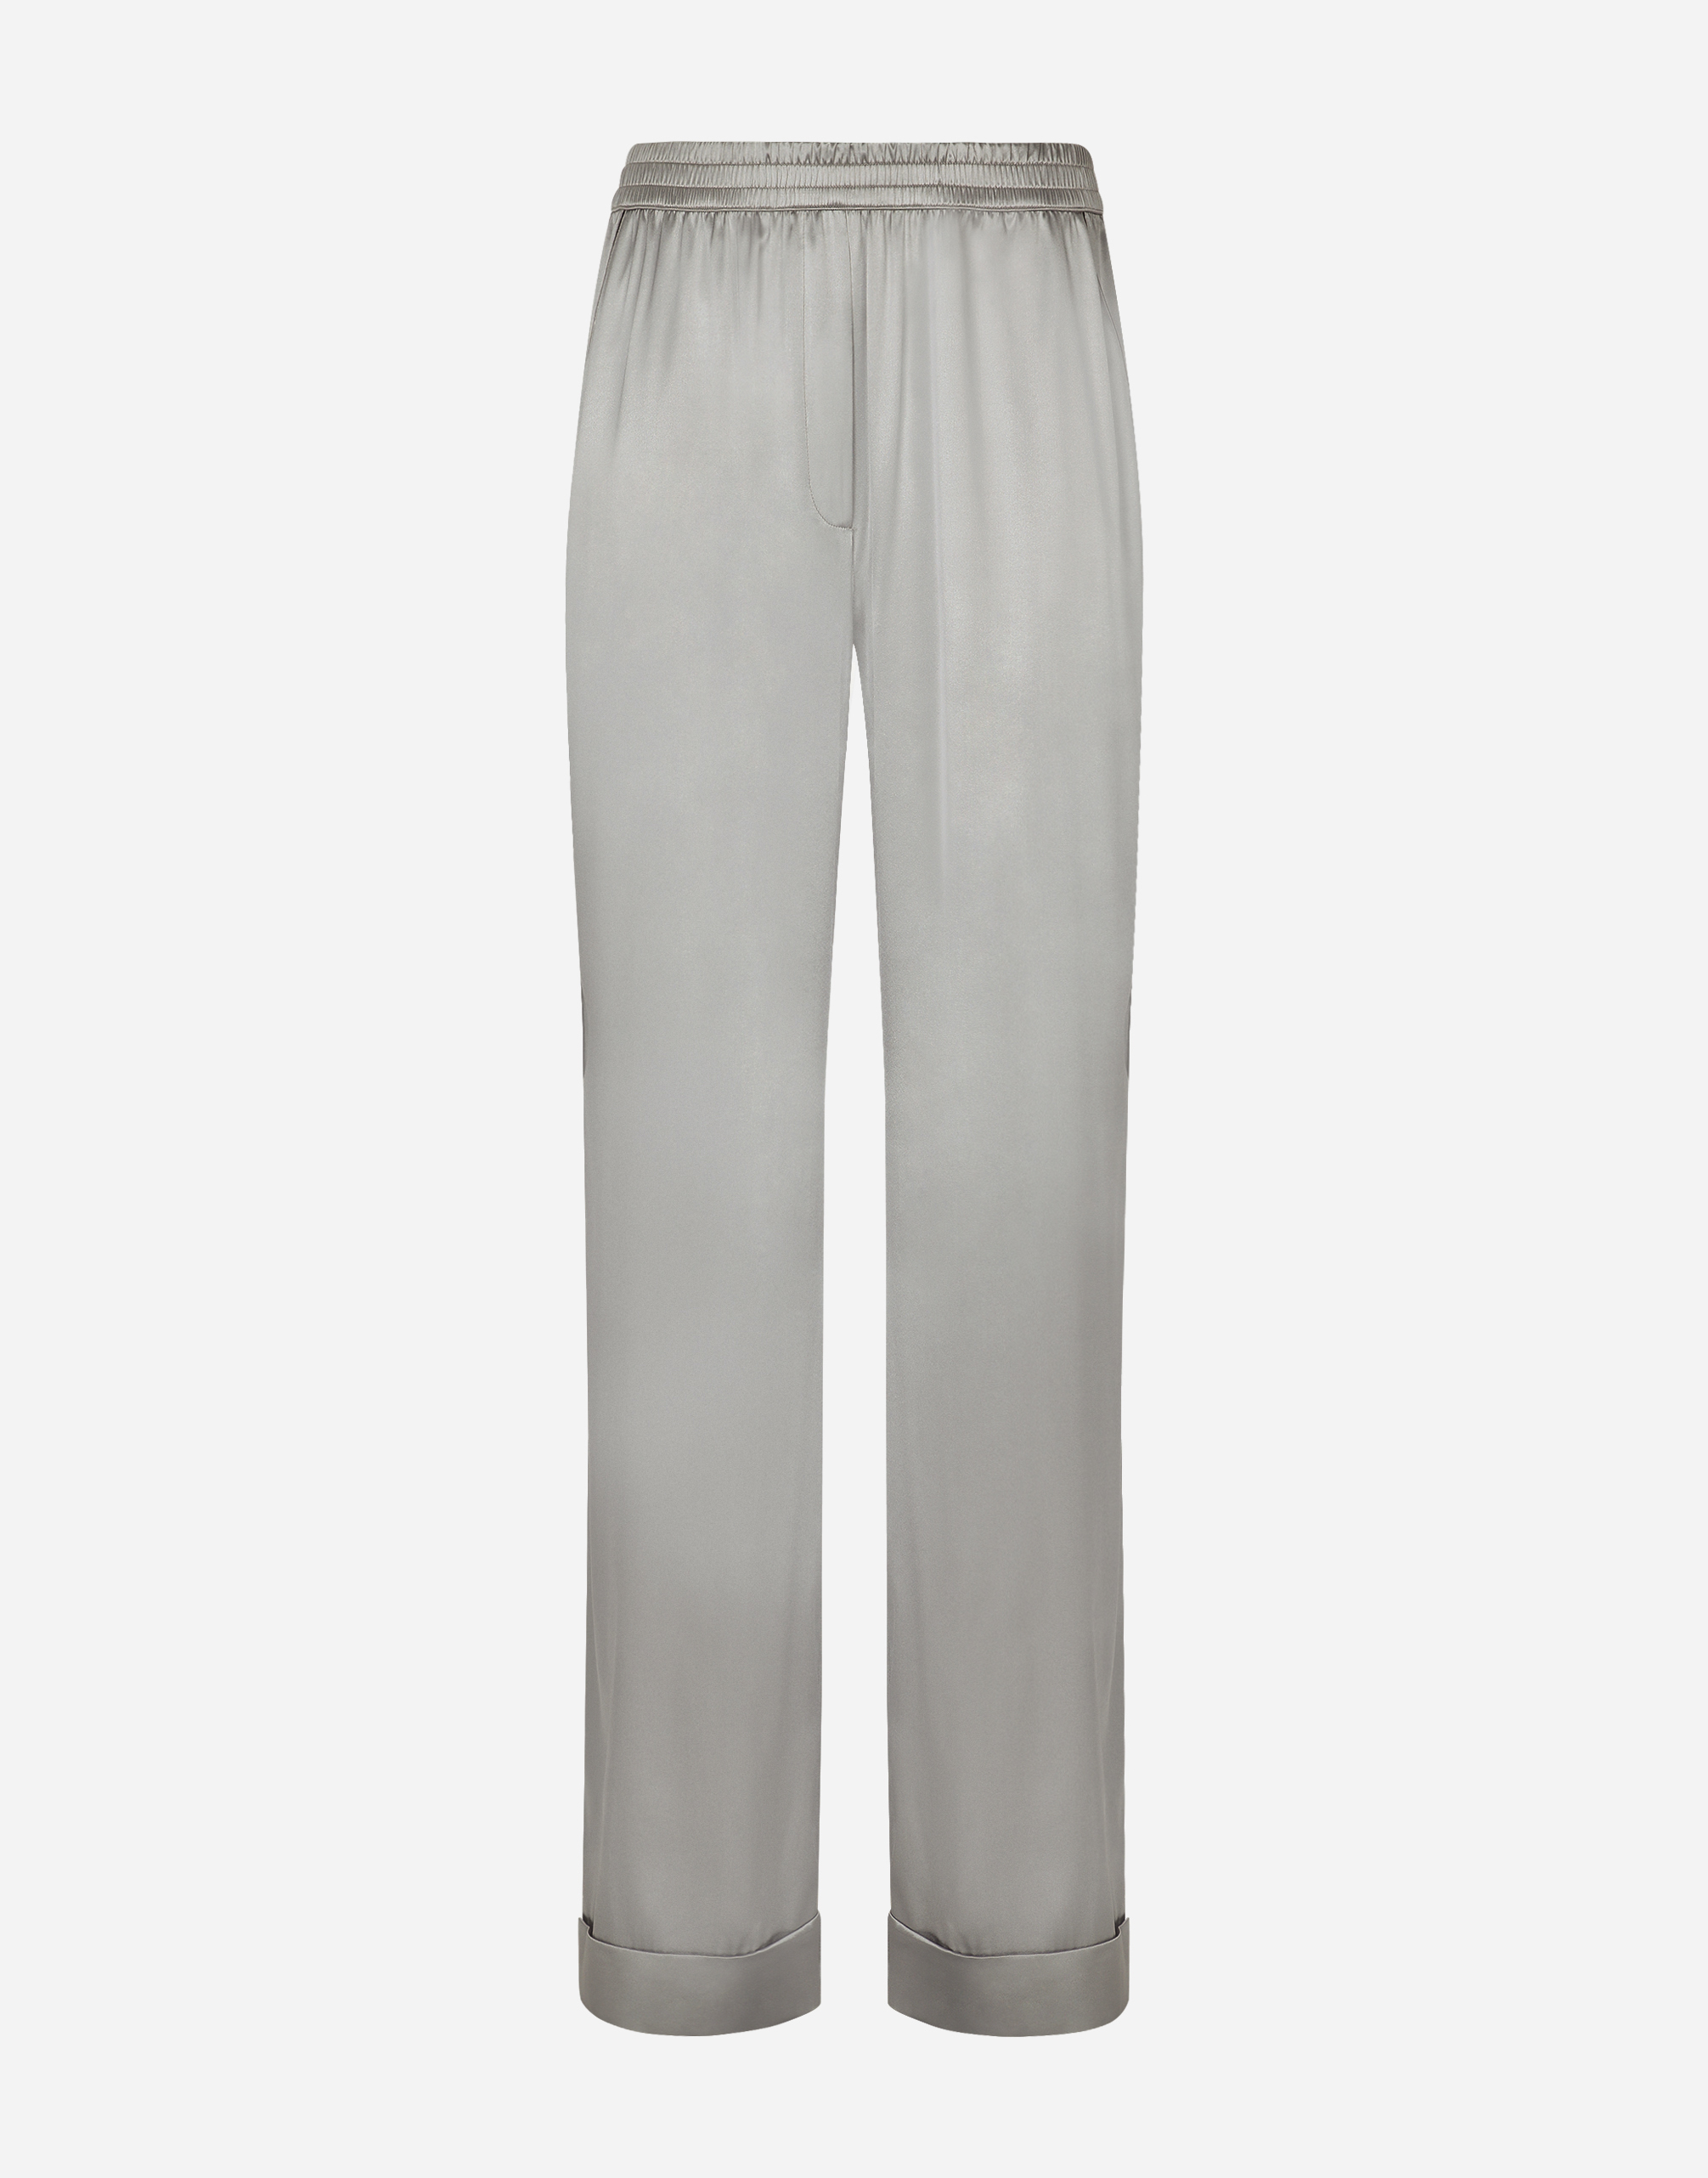 Dolce & Gabbana Satin Pyjama Trousers With Piping In Grey